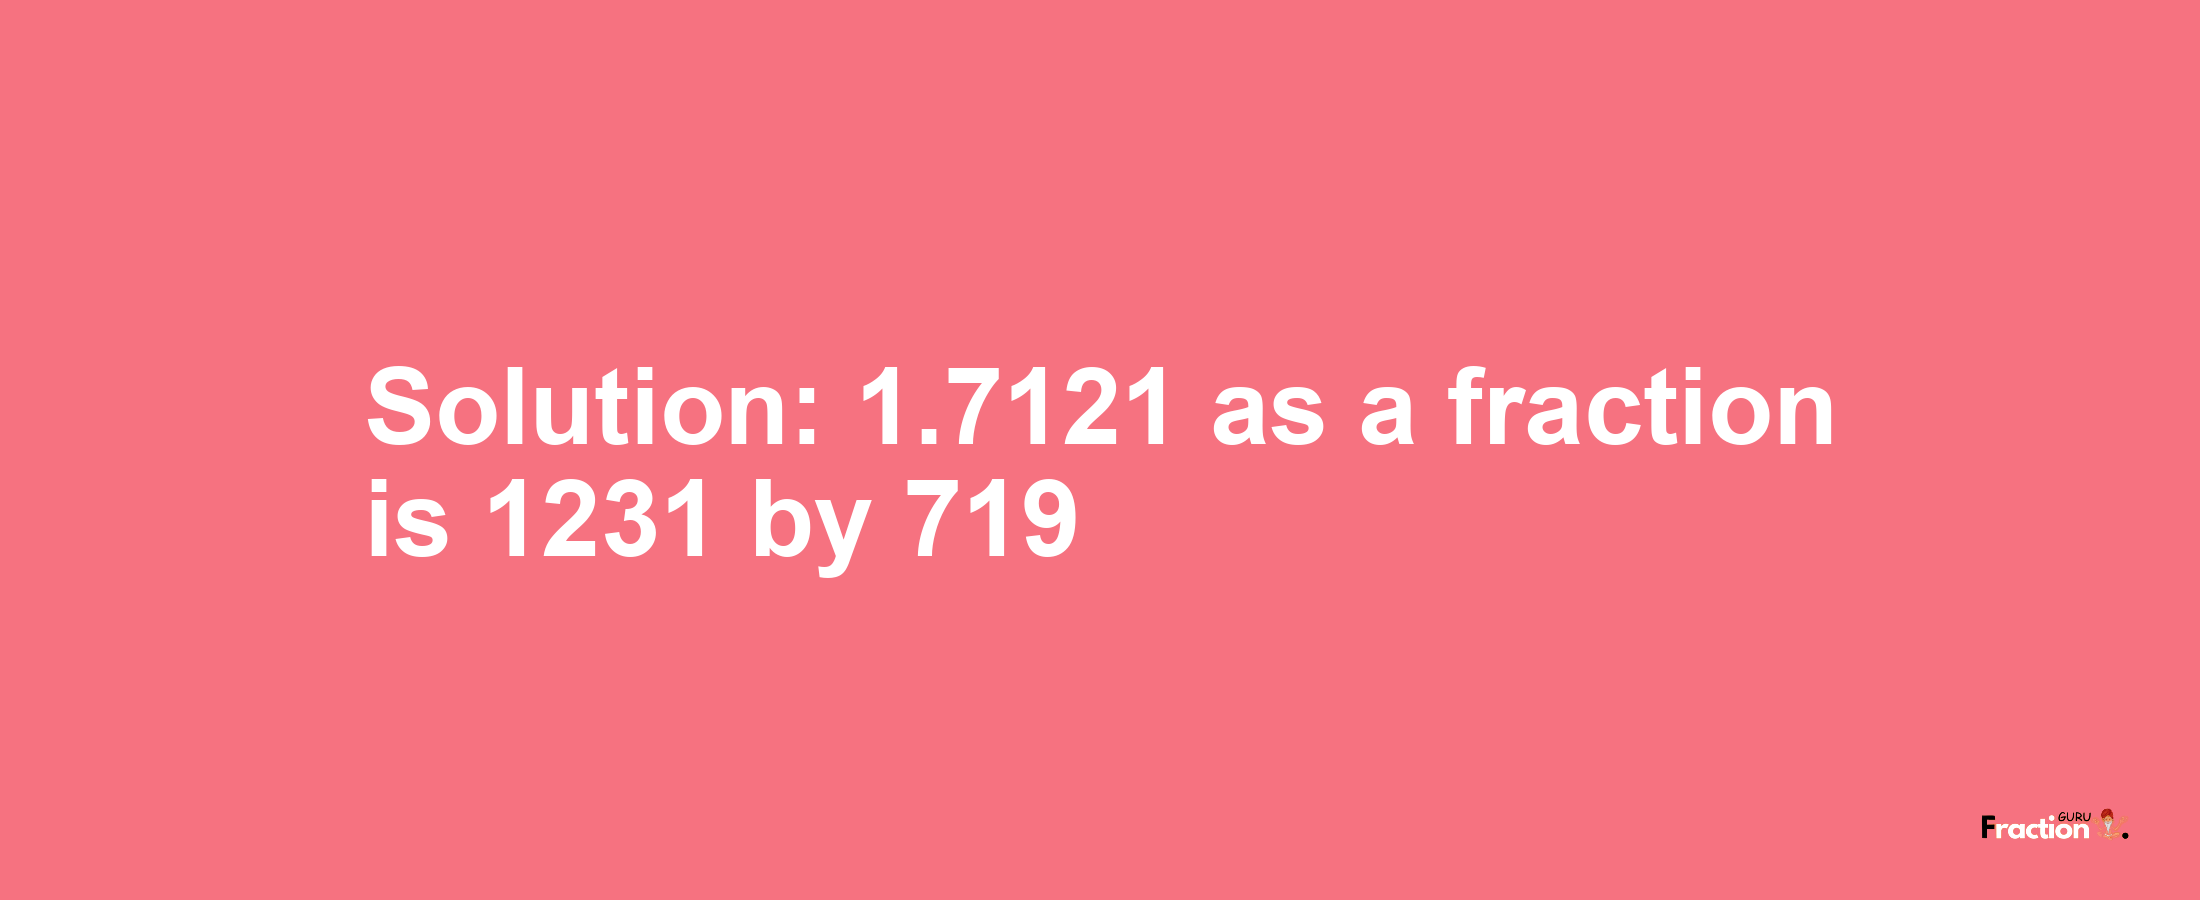 Solution:1.7121 as a fraction is 1231/719